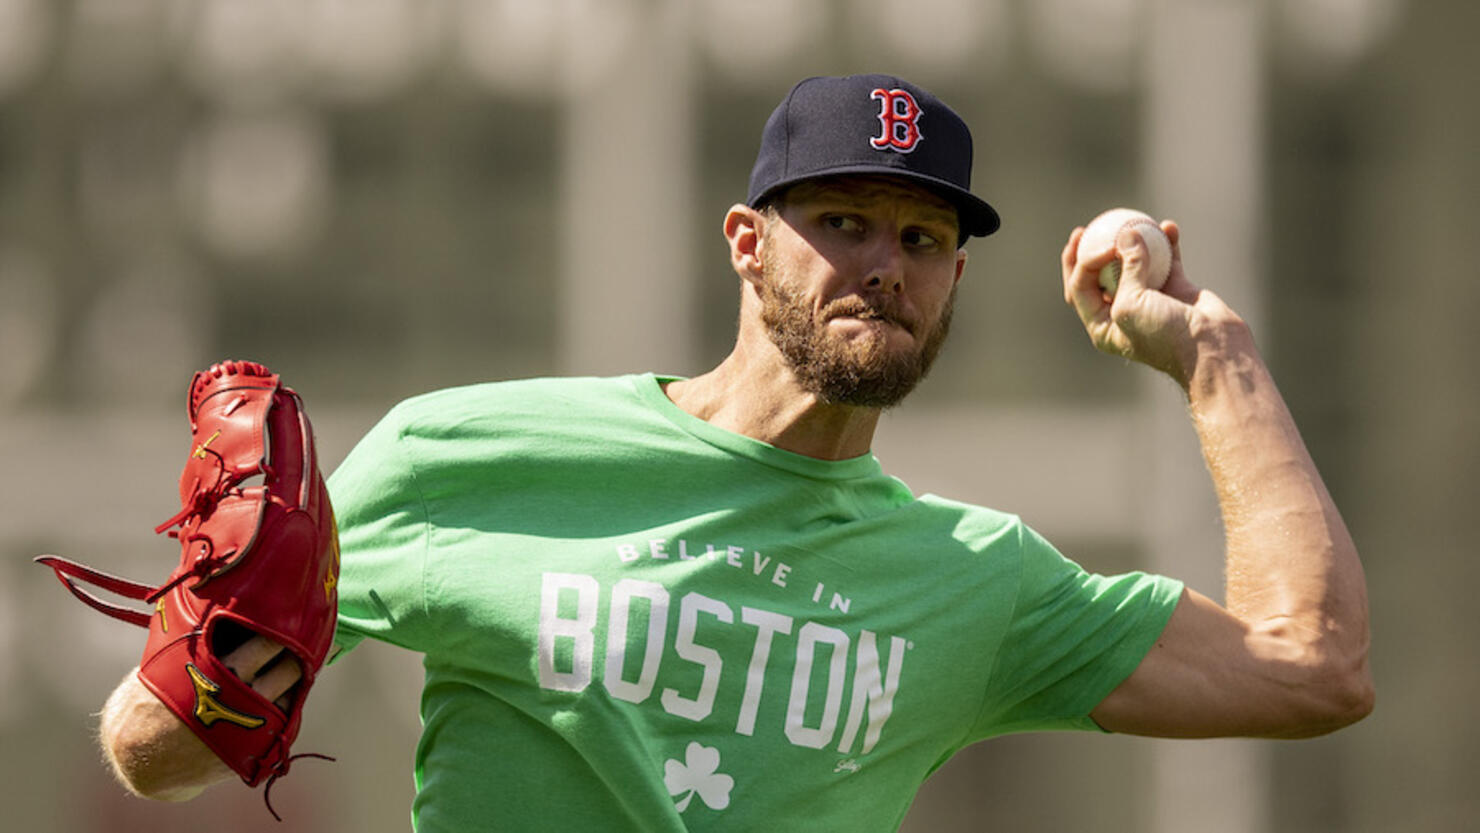 Chris Sale strikes out three over two innings for WooSox in first rehab  start - CBS Boston